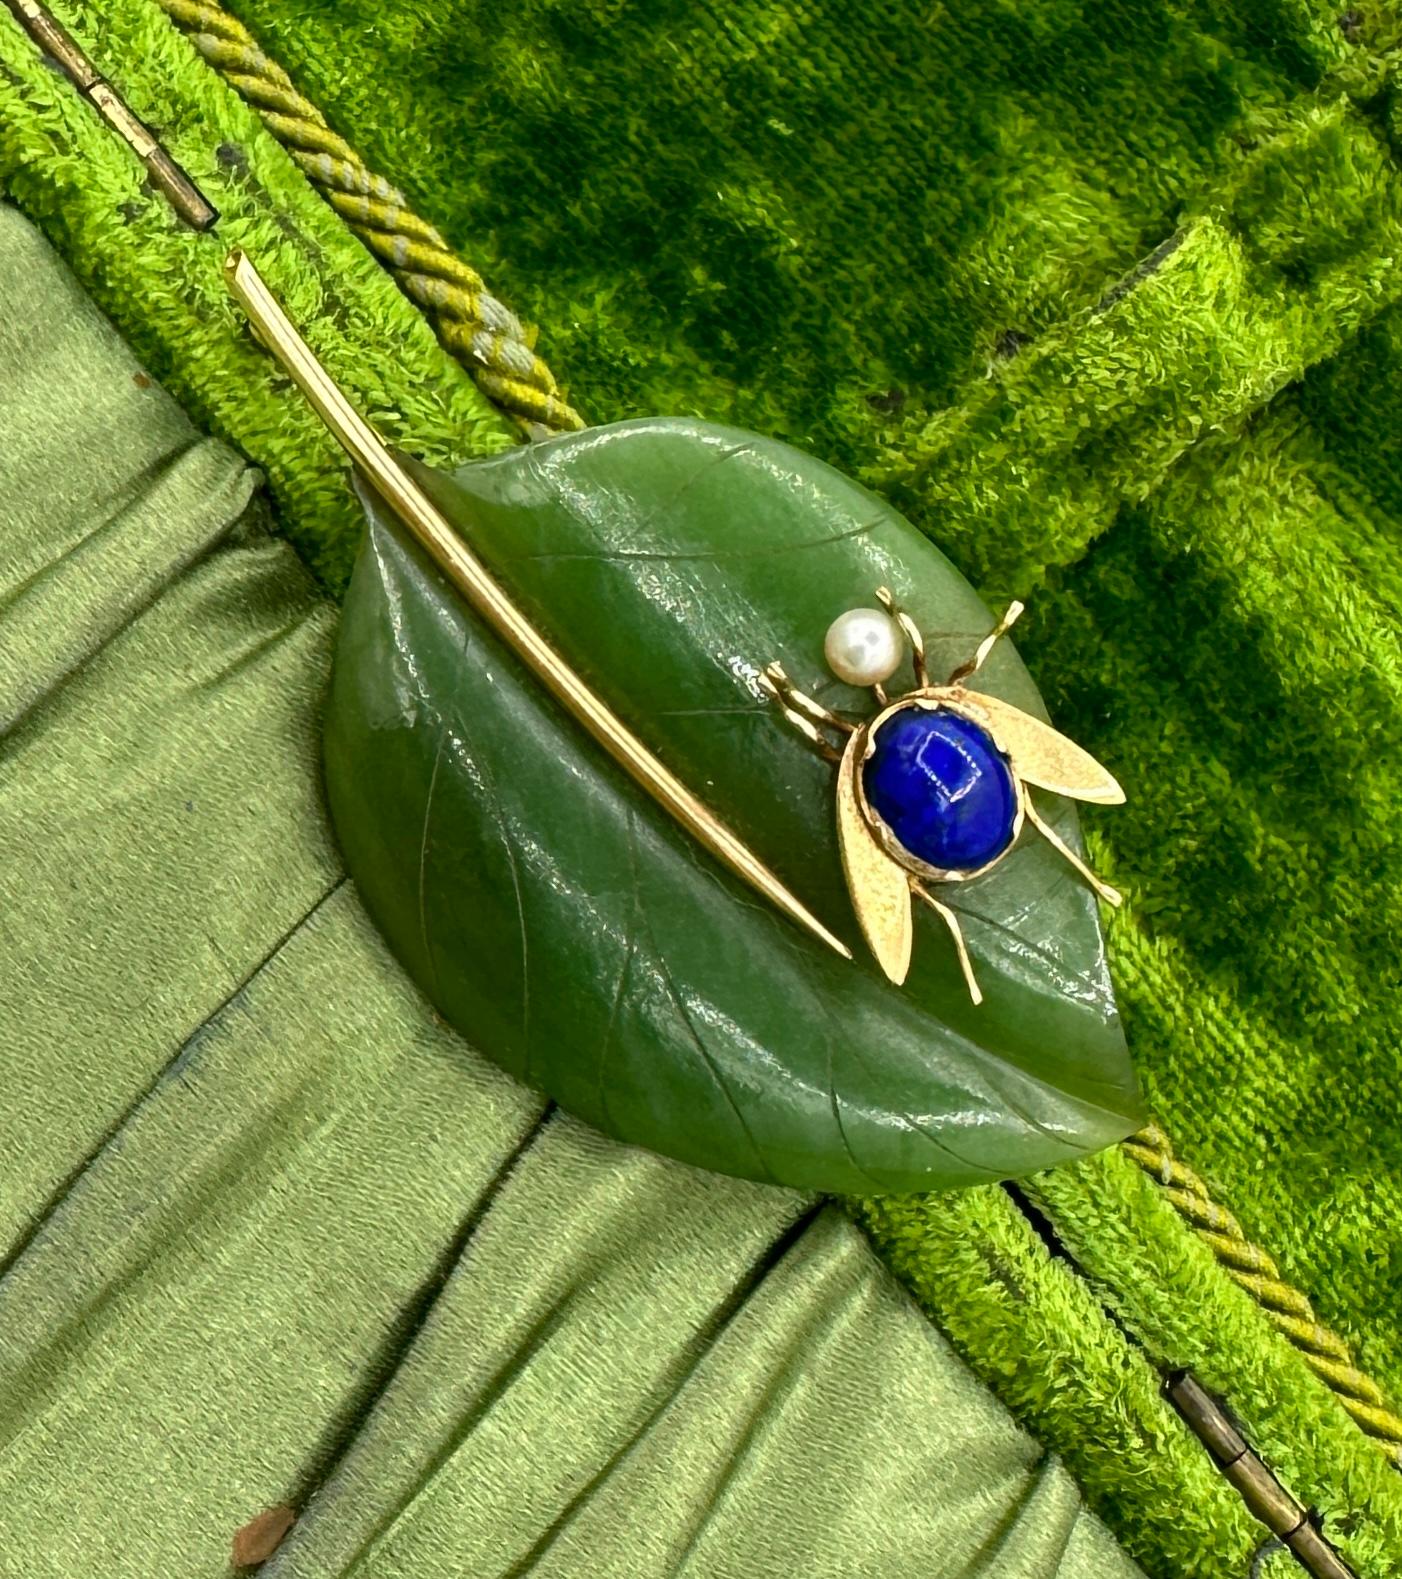 This is an absolutely stunning Jade, Lapis Lazuli and Pearl Fly Bug Insect on a Leaf Brooch Pin in 14 Karat Yellow Gold.  The fabulous fly or insect has a lapis lazuli cabochon body and a pearl head.  Its wings and legs are gold.   The bug rests on